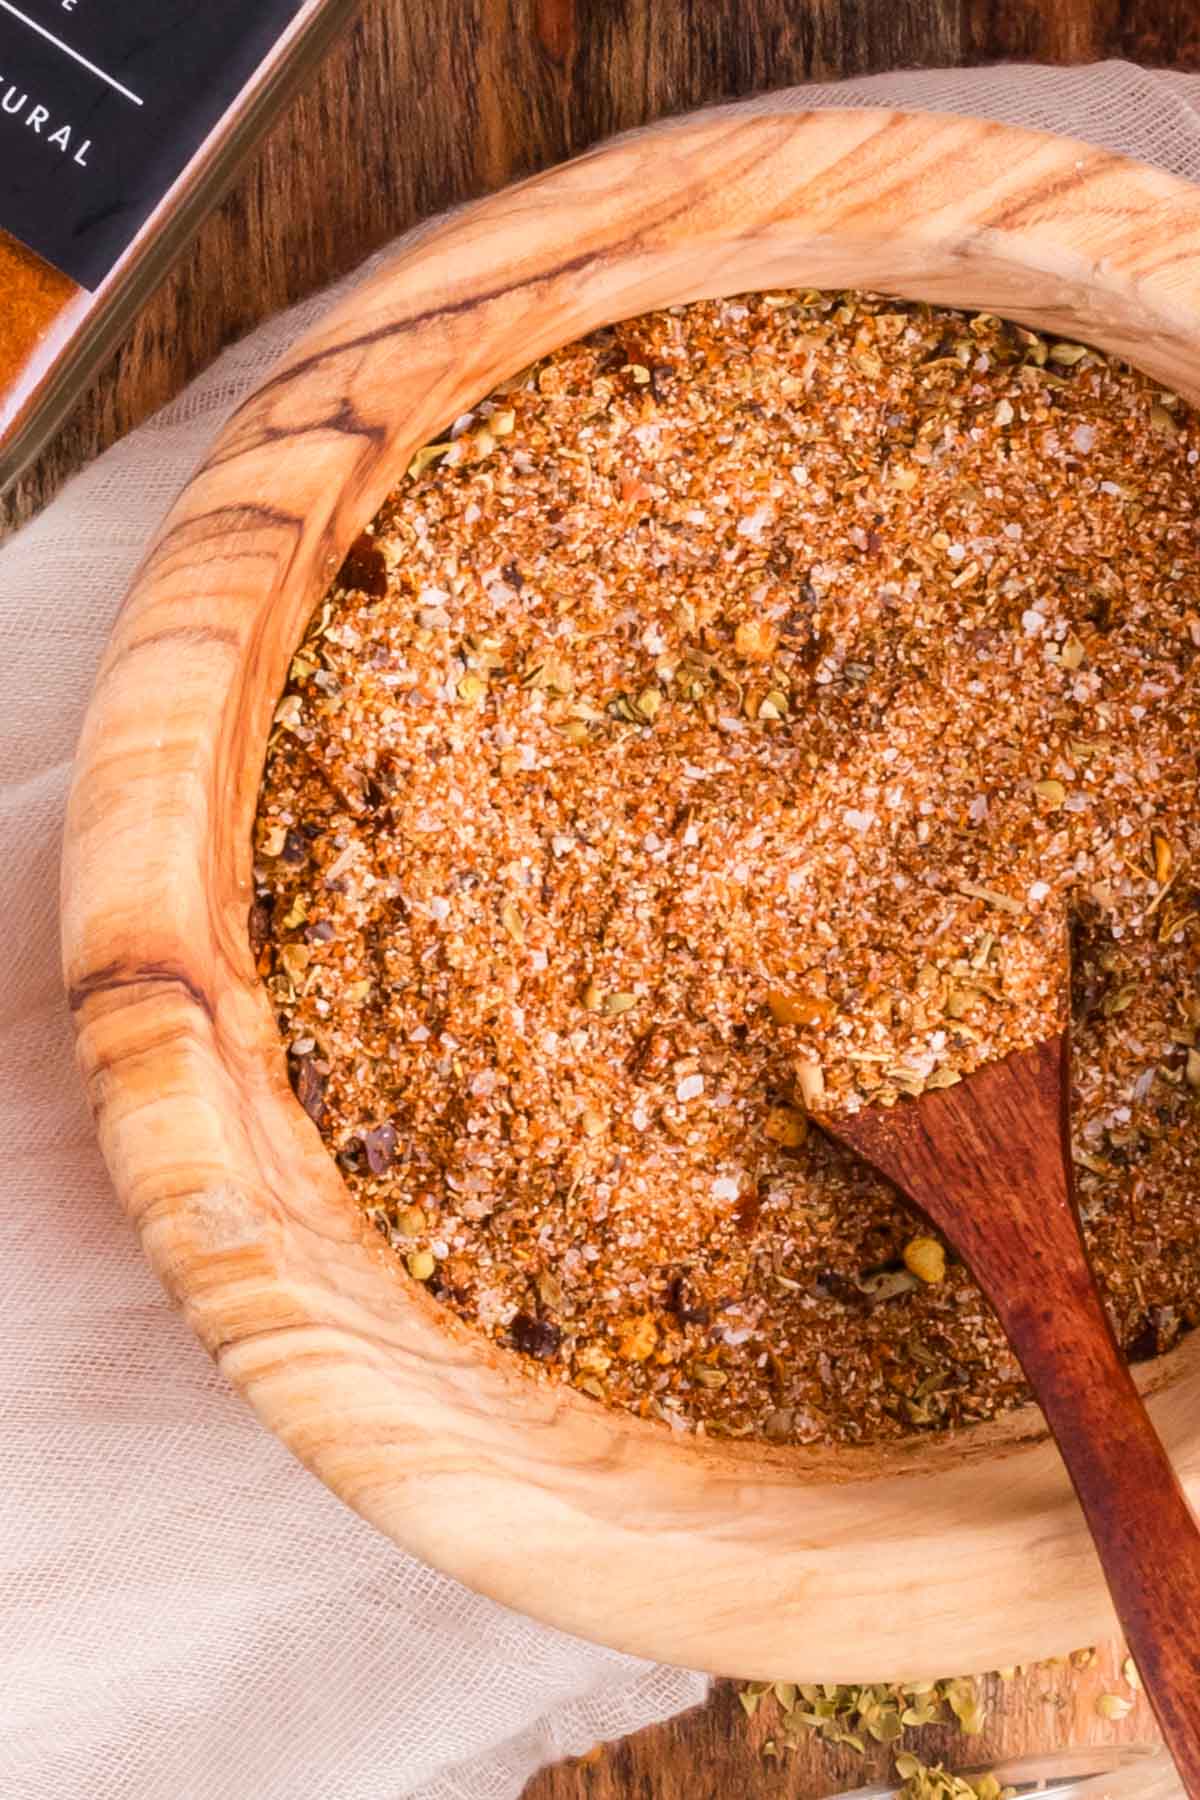 A close up view of the texture of all of the spices in a bowl used to make taco seasonings.